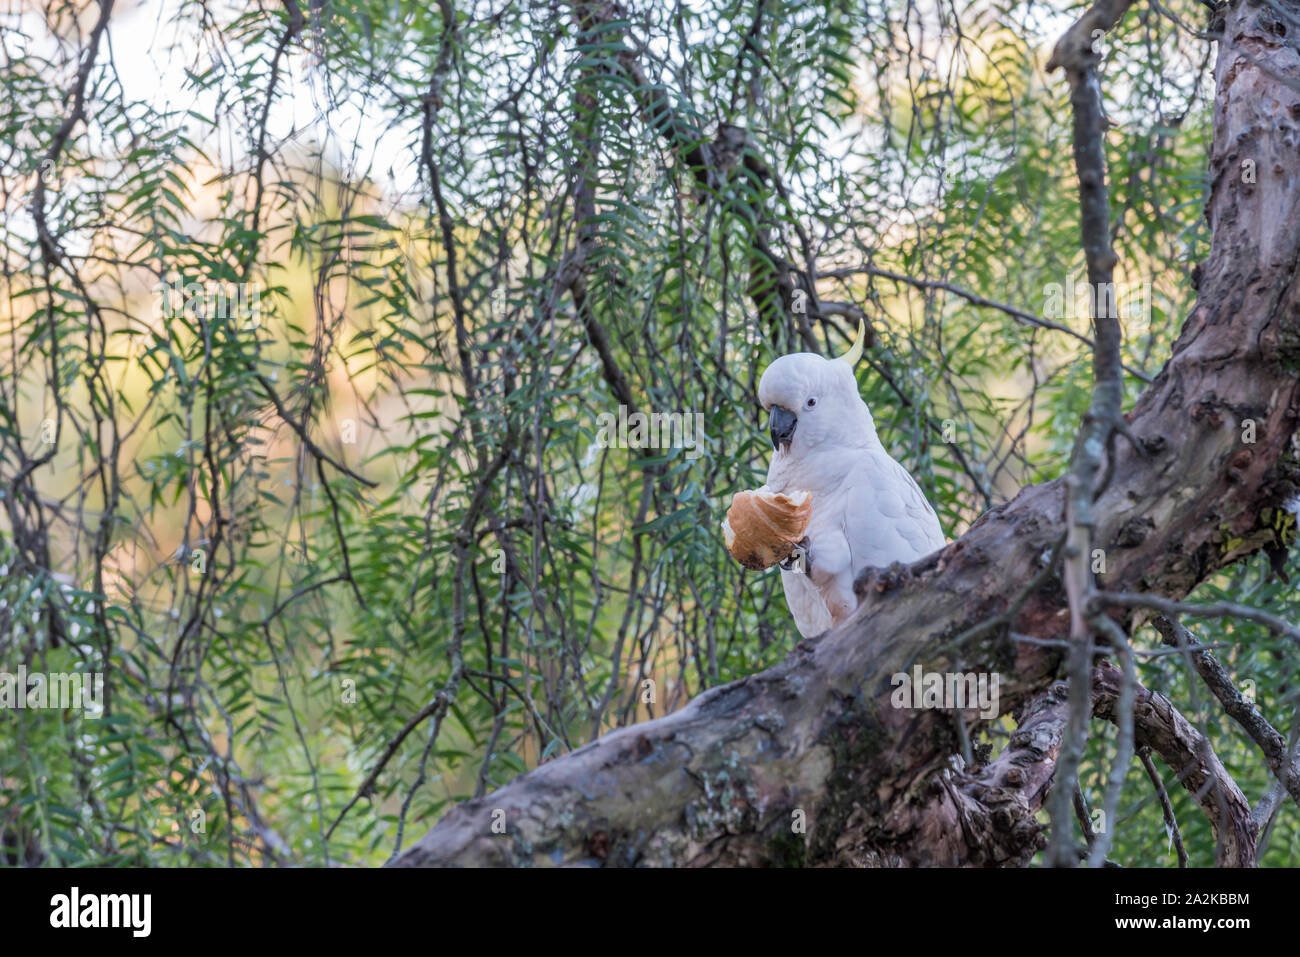 A Sulphur-Crested Cockatoo (Cacatua galerita) sitting on a tree branch near local shops in Gordon, Sydney and feeding on a croissant Stock Photo